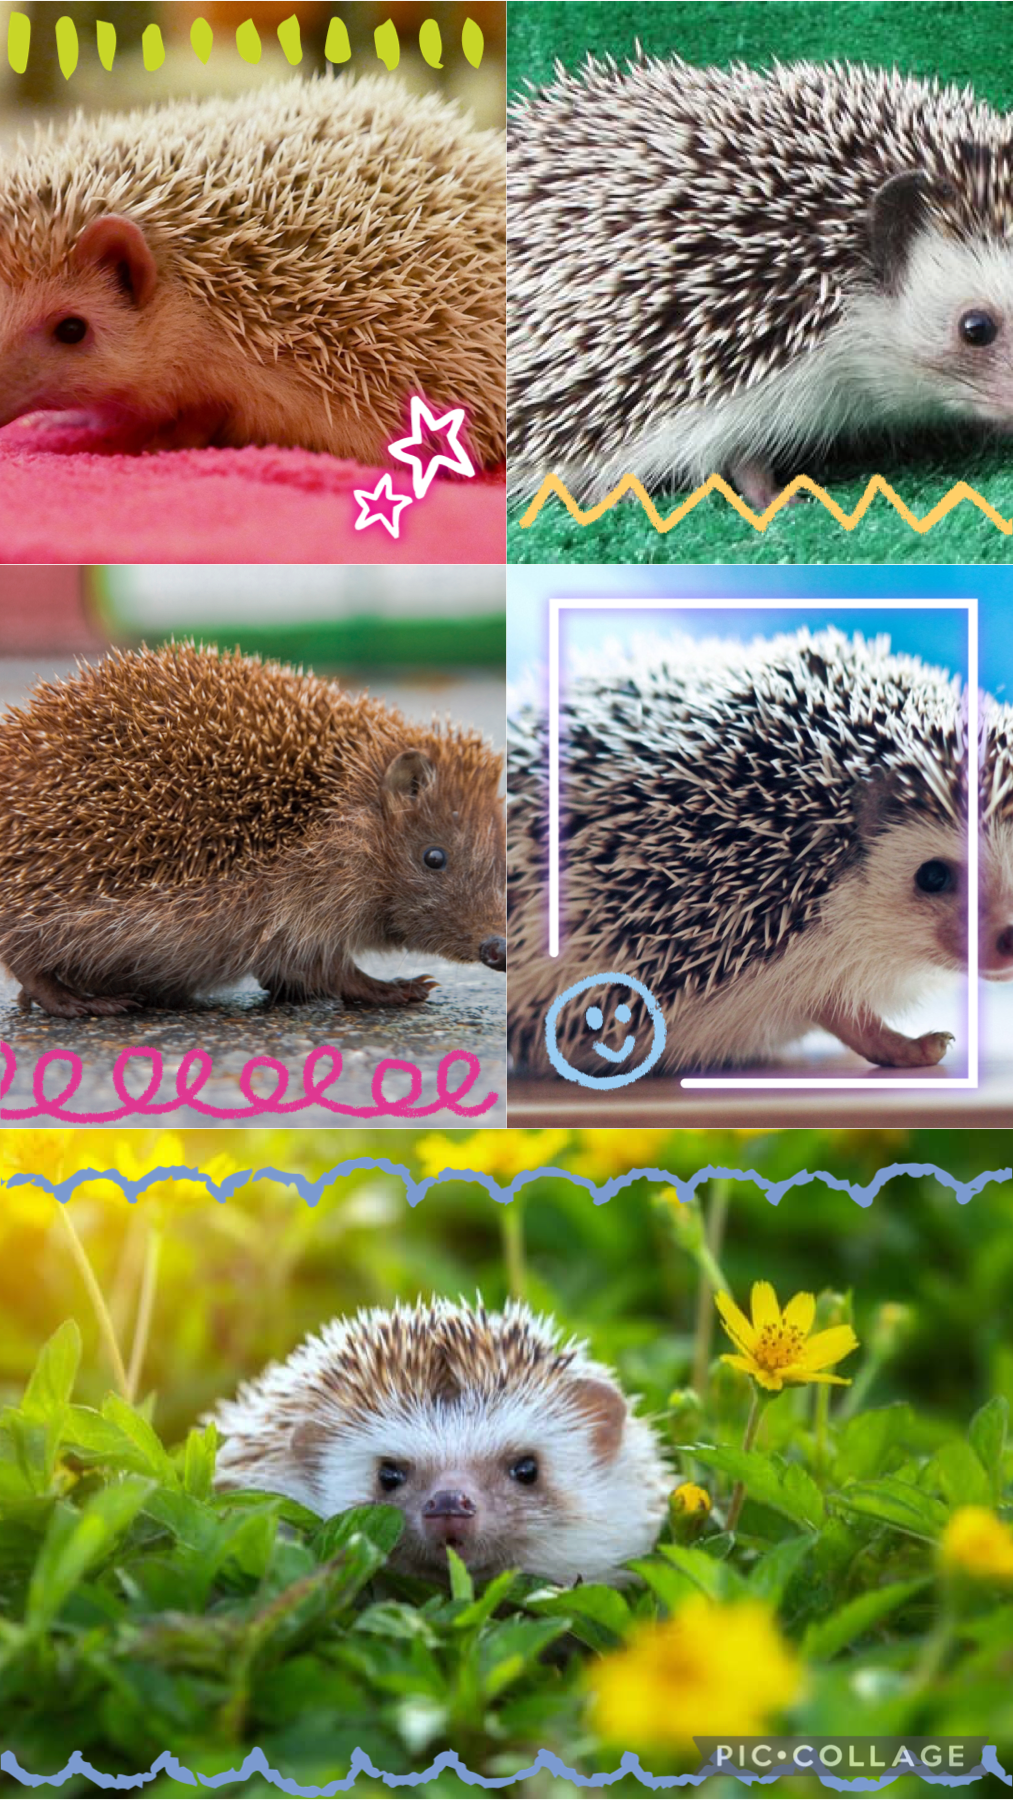 For my friend who loves hedgehog 